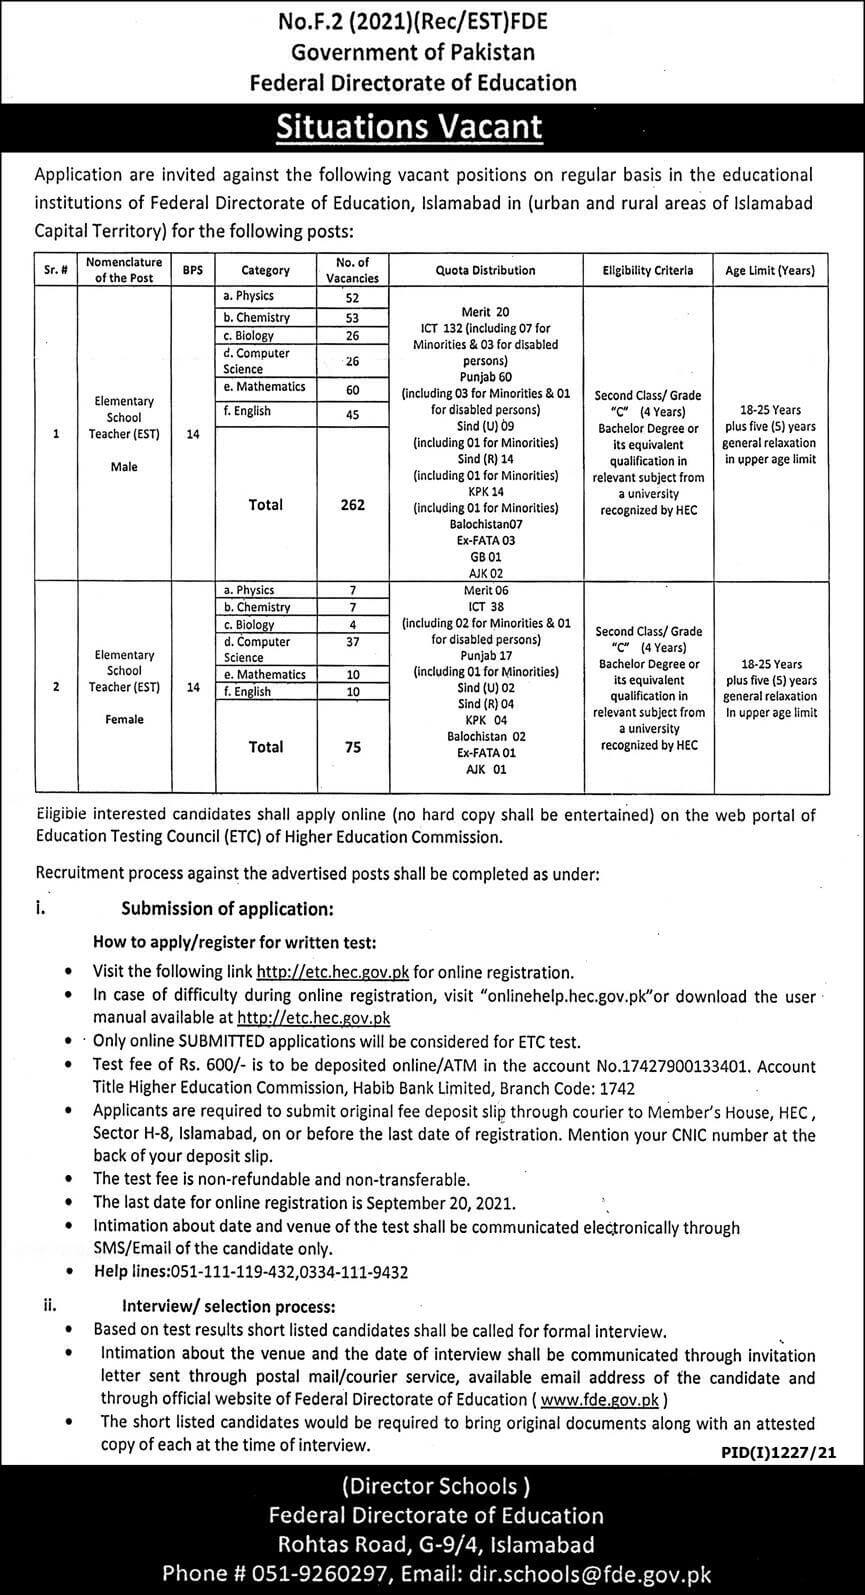 Federal Directorate of Education FDE Jobs in Islamabad 2021